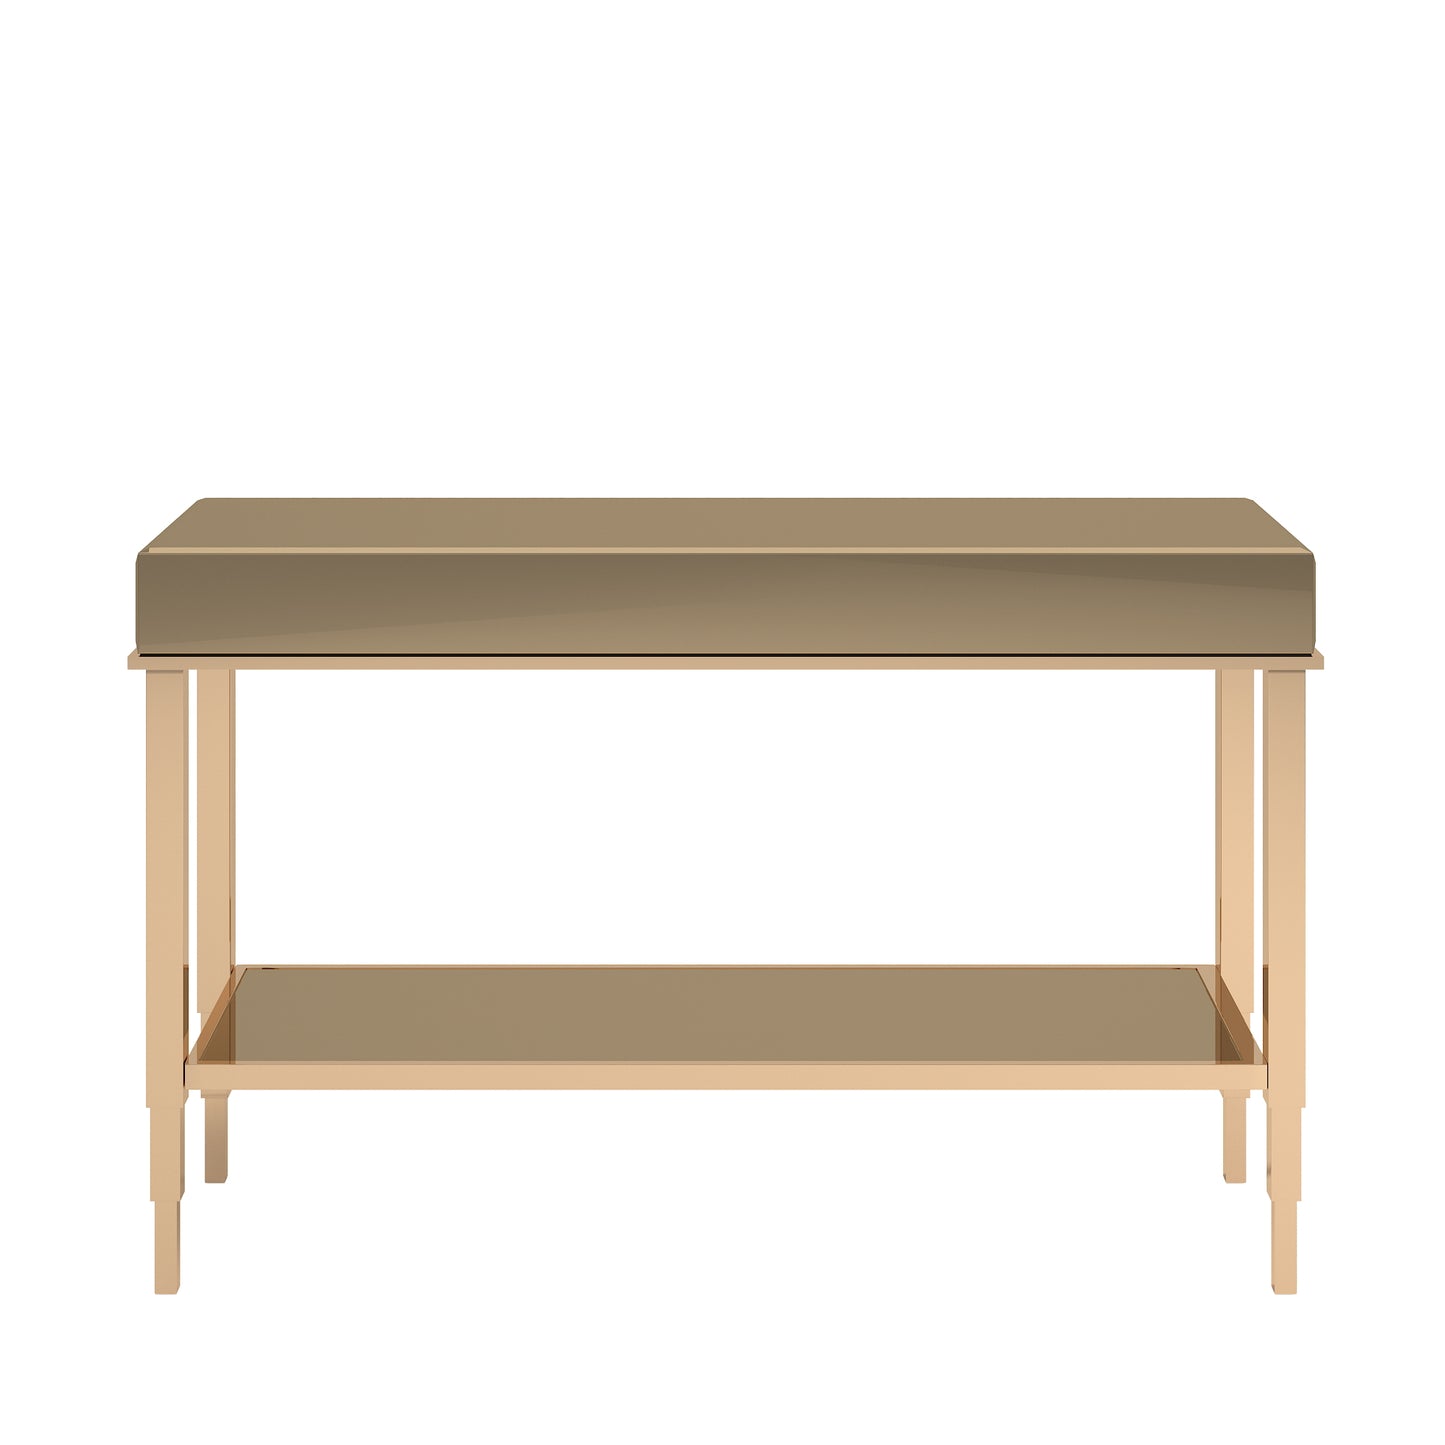 Mirrored 1-Drawer TV Stand - Champagne Gold